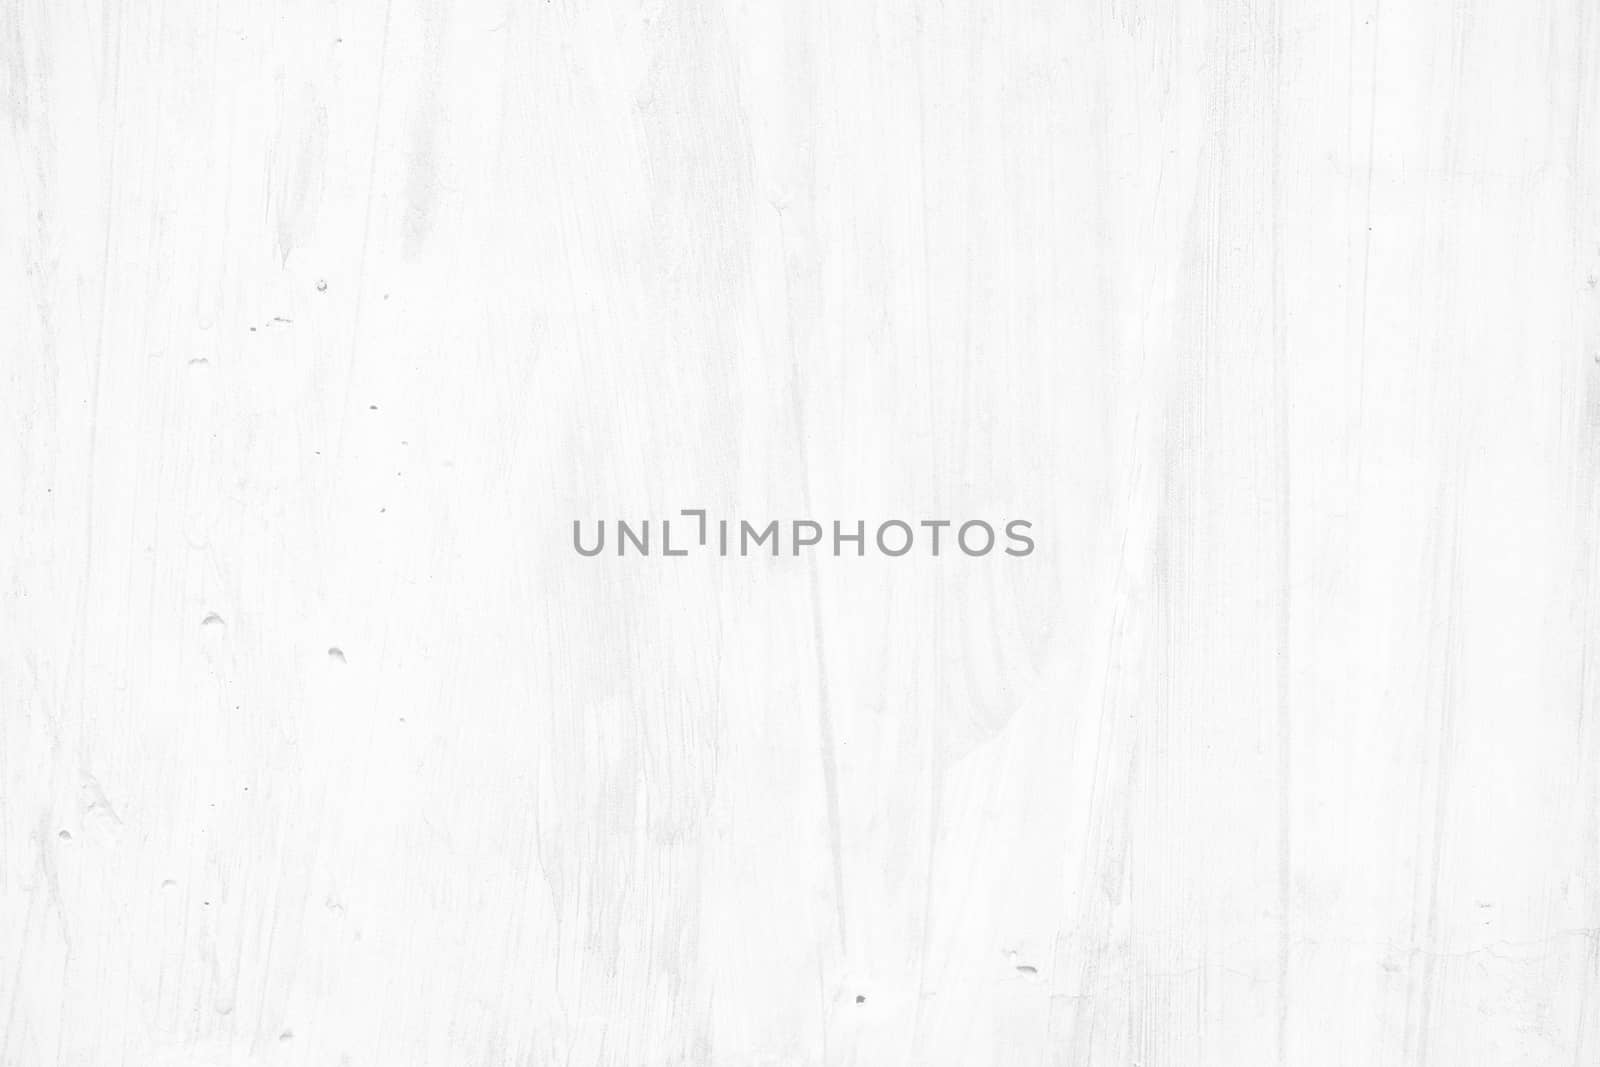 Water Grunge on White Concrete Wall Texture Background.